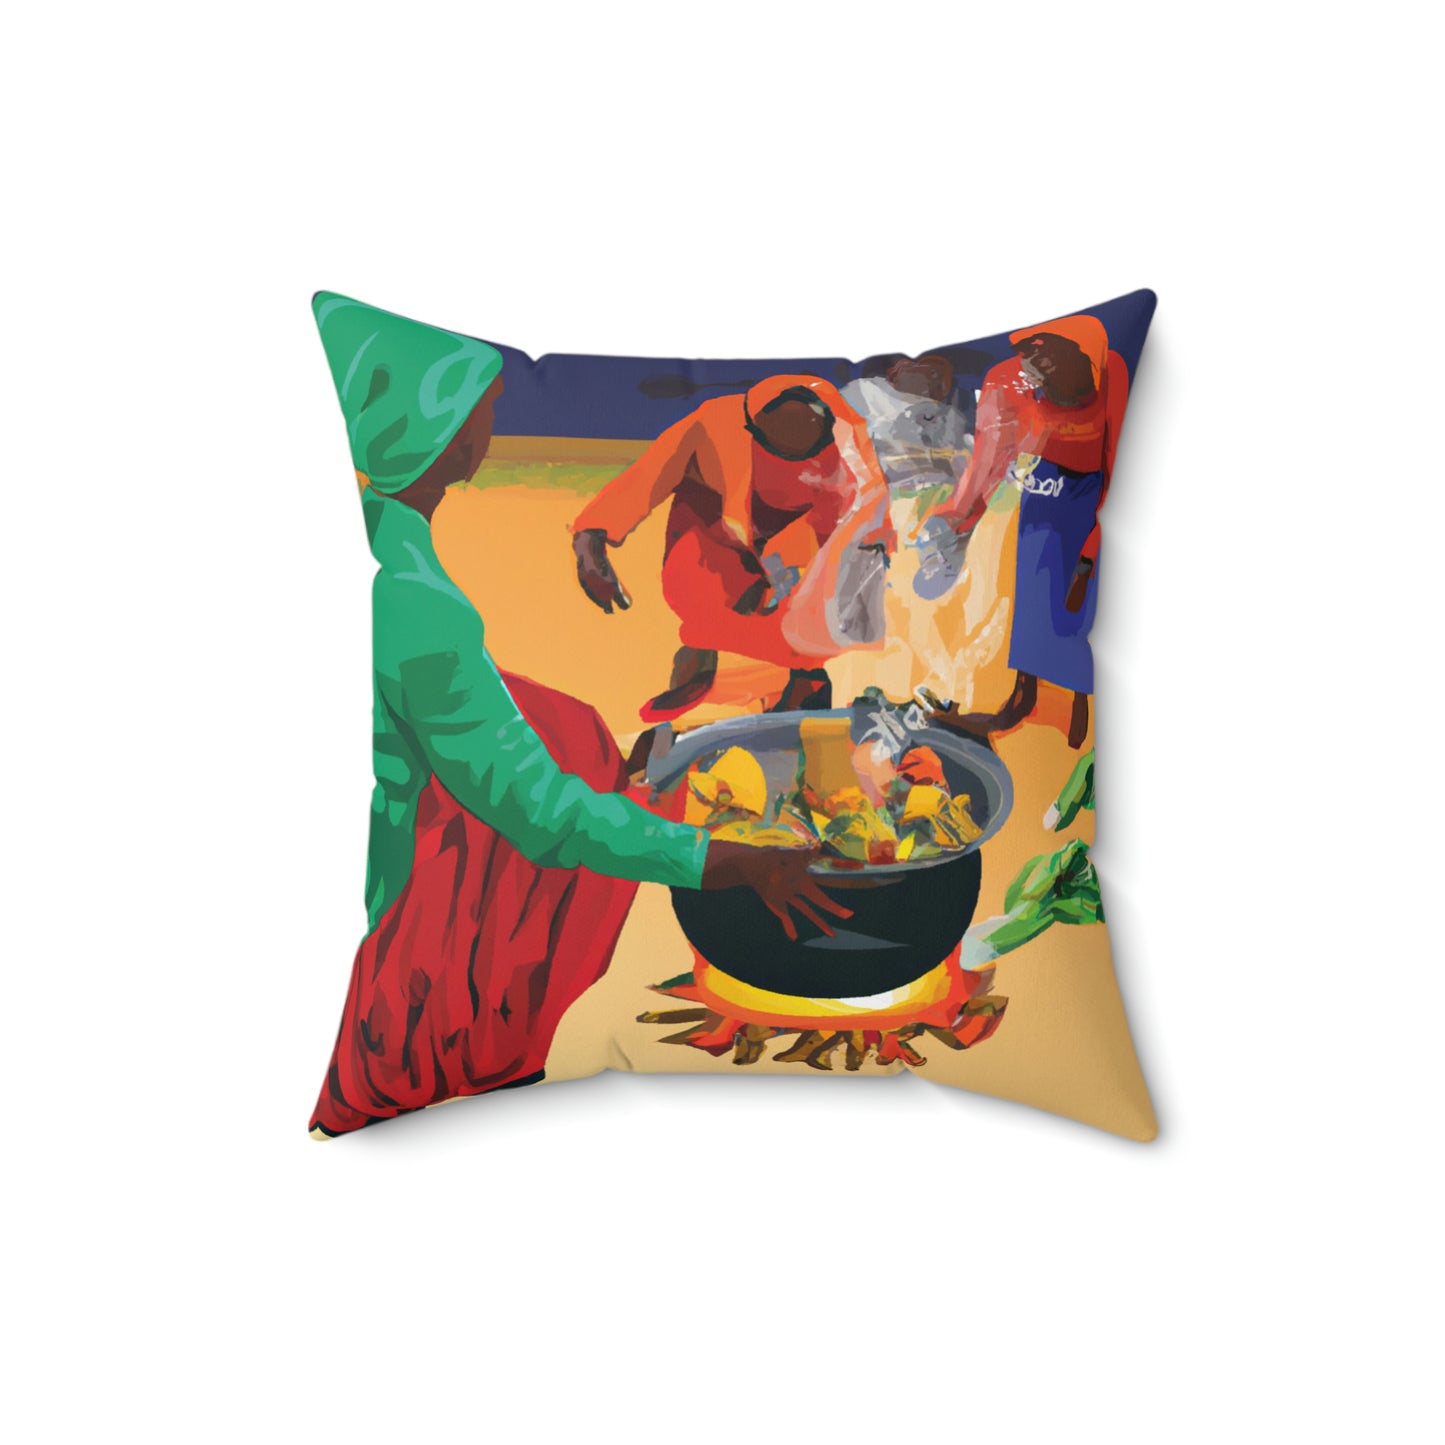 Polyester Square Pillow - Family Cooking